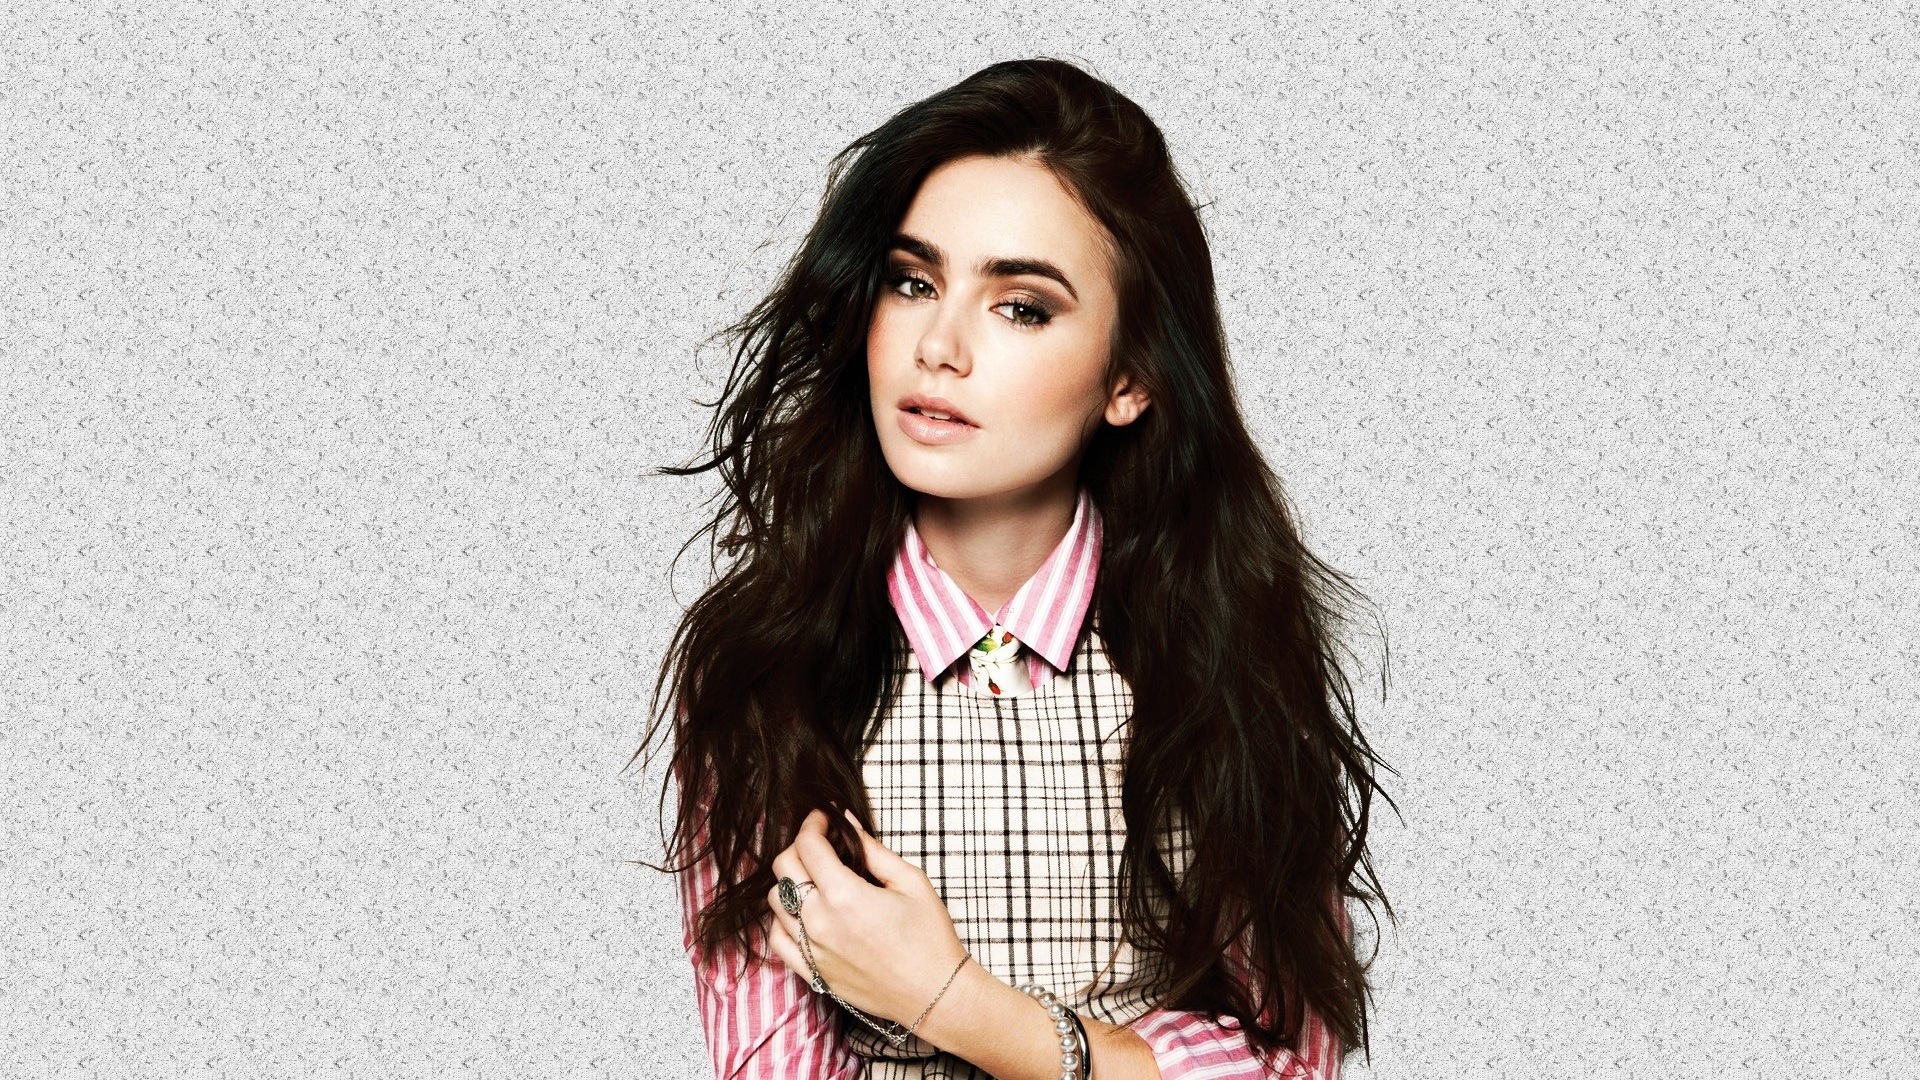 Lily Collins beautiful wallpapers #9 - 1920x1080